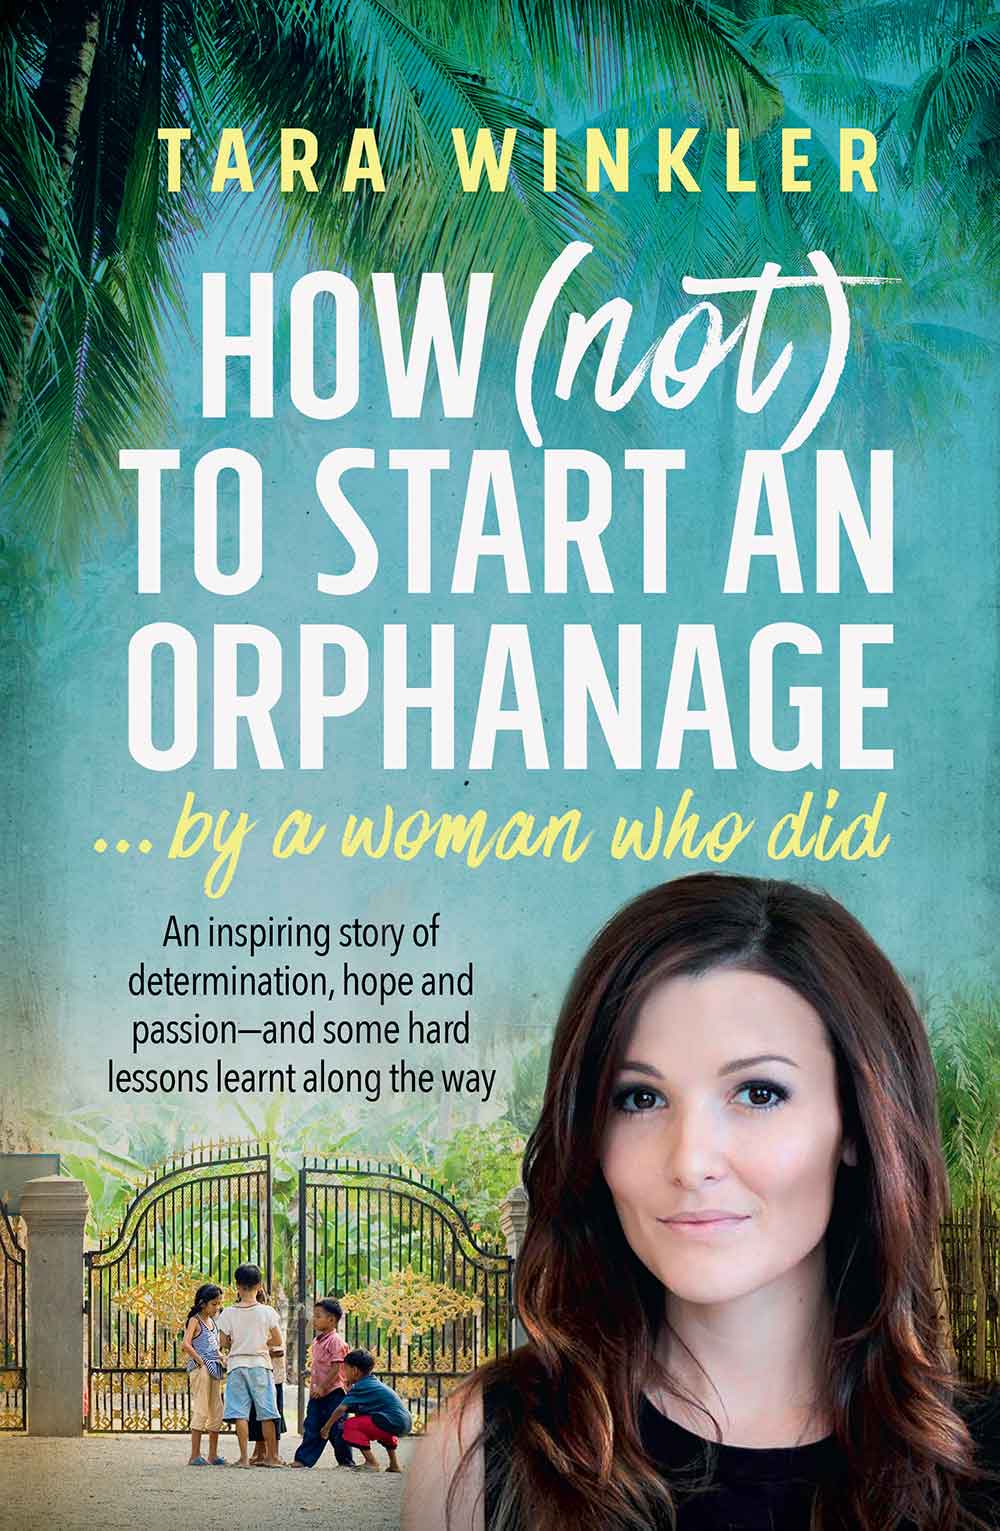 Book cover for Tara Winkler's book " How (not) To Start An Orphanage - by the woman who did